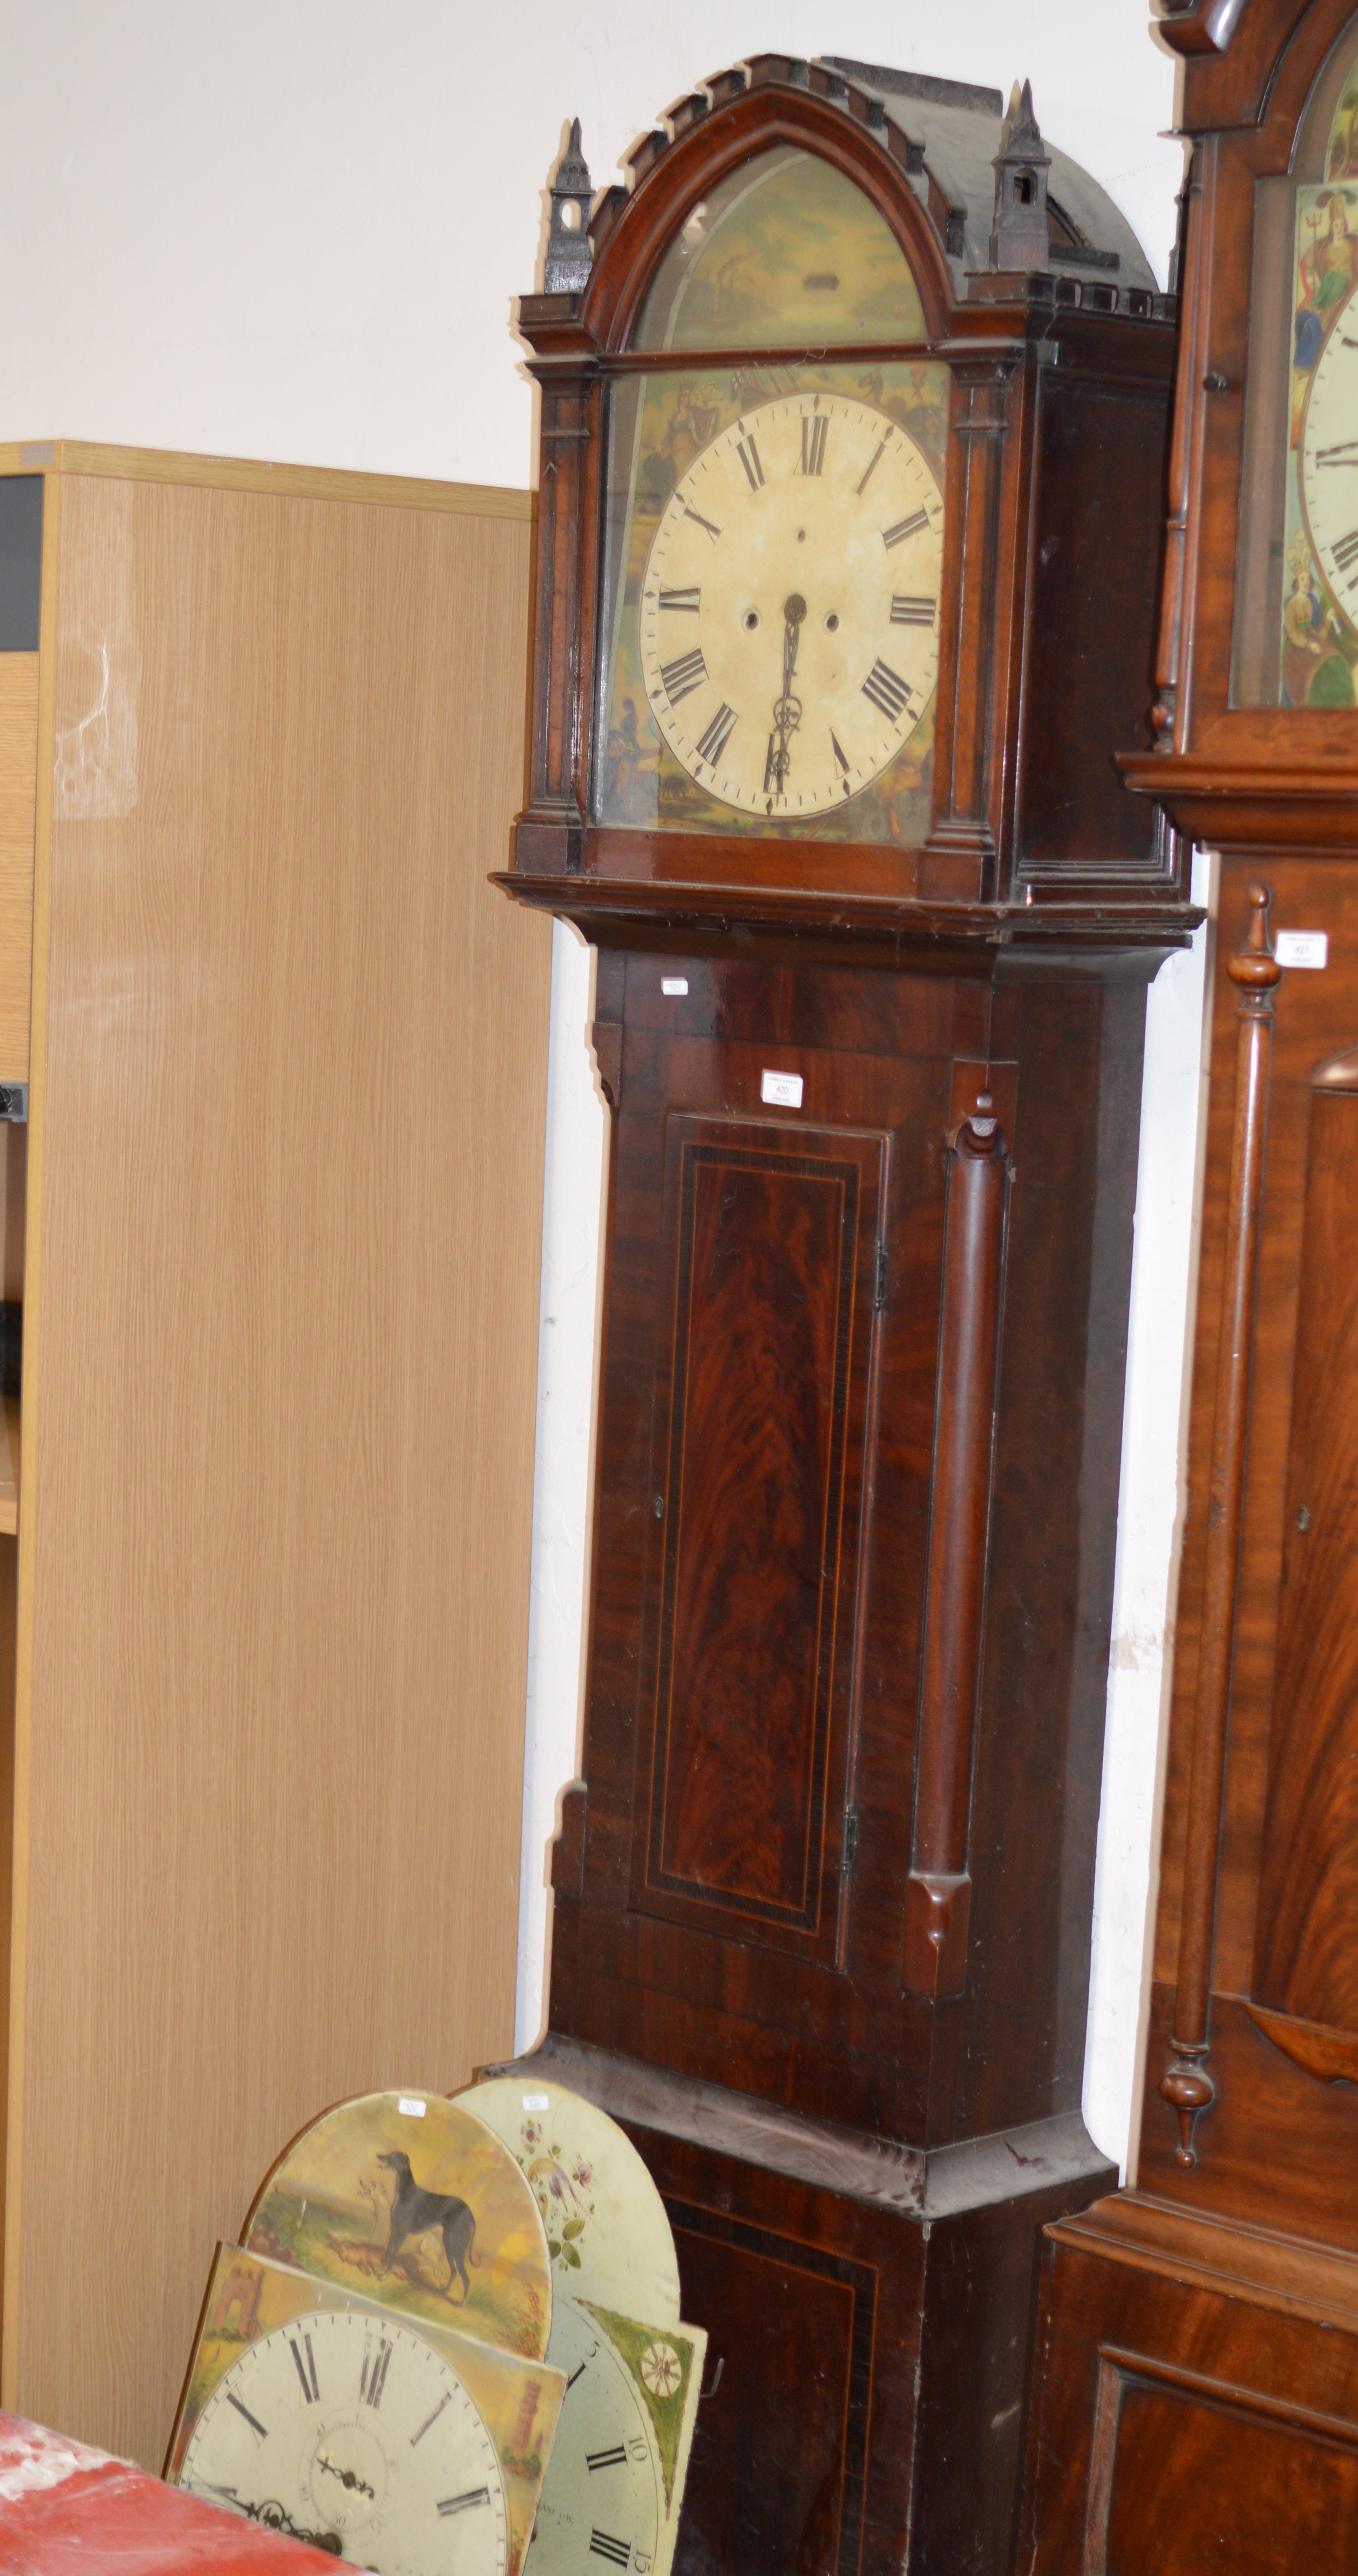 MAHOGANY CASED GRANDFATHER CLOCK WITH 2 ADDITIONAL GRANDFATHER CLOCK FACES